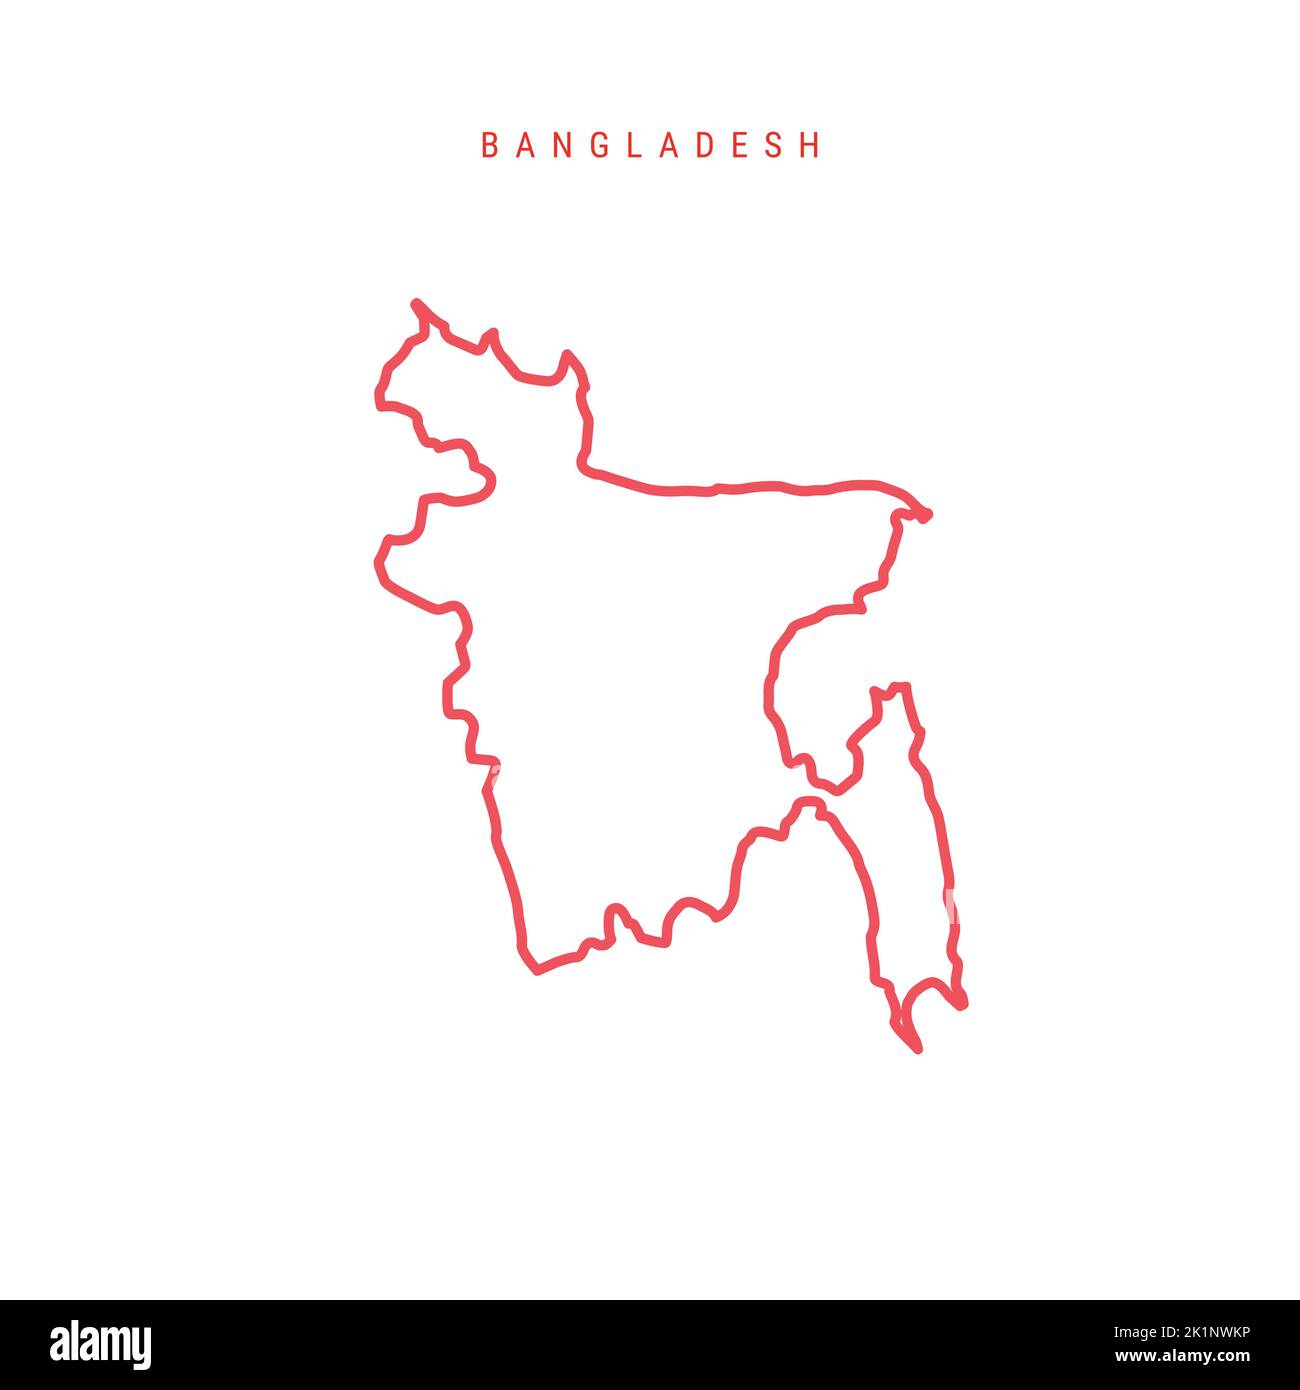 Bangladesh editable outline map. Bangladeshi red border. Country name. Adjust line weight. Change to any color. Vector illustration. Stock Vector